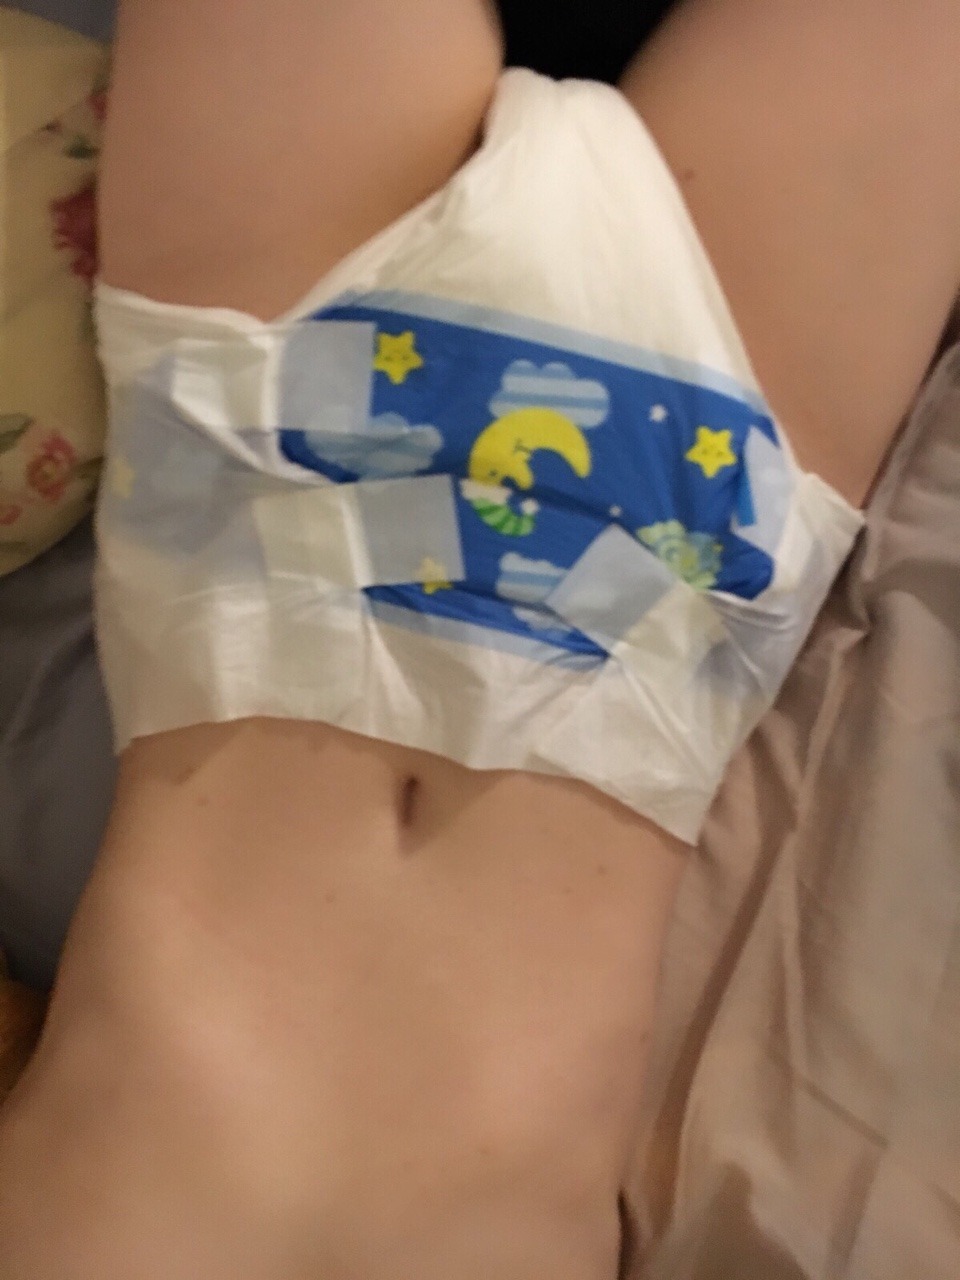 appleabdl:  Some blurry pics from this morning.  I love these diapers so much, I